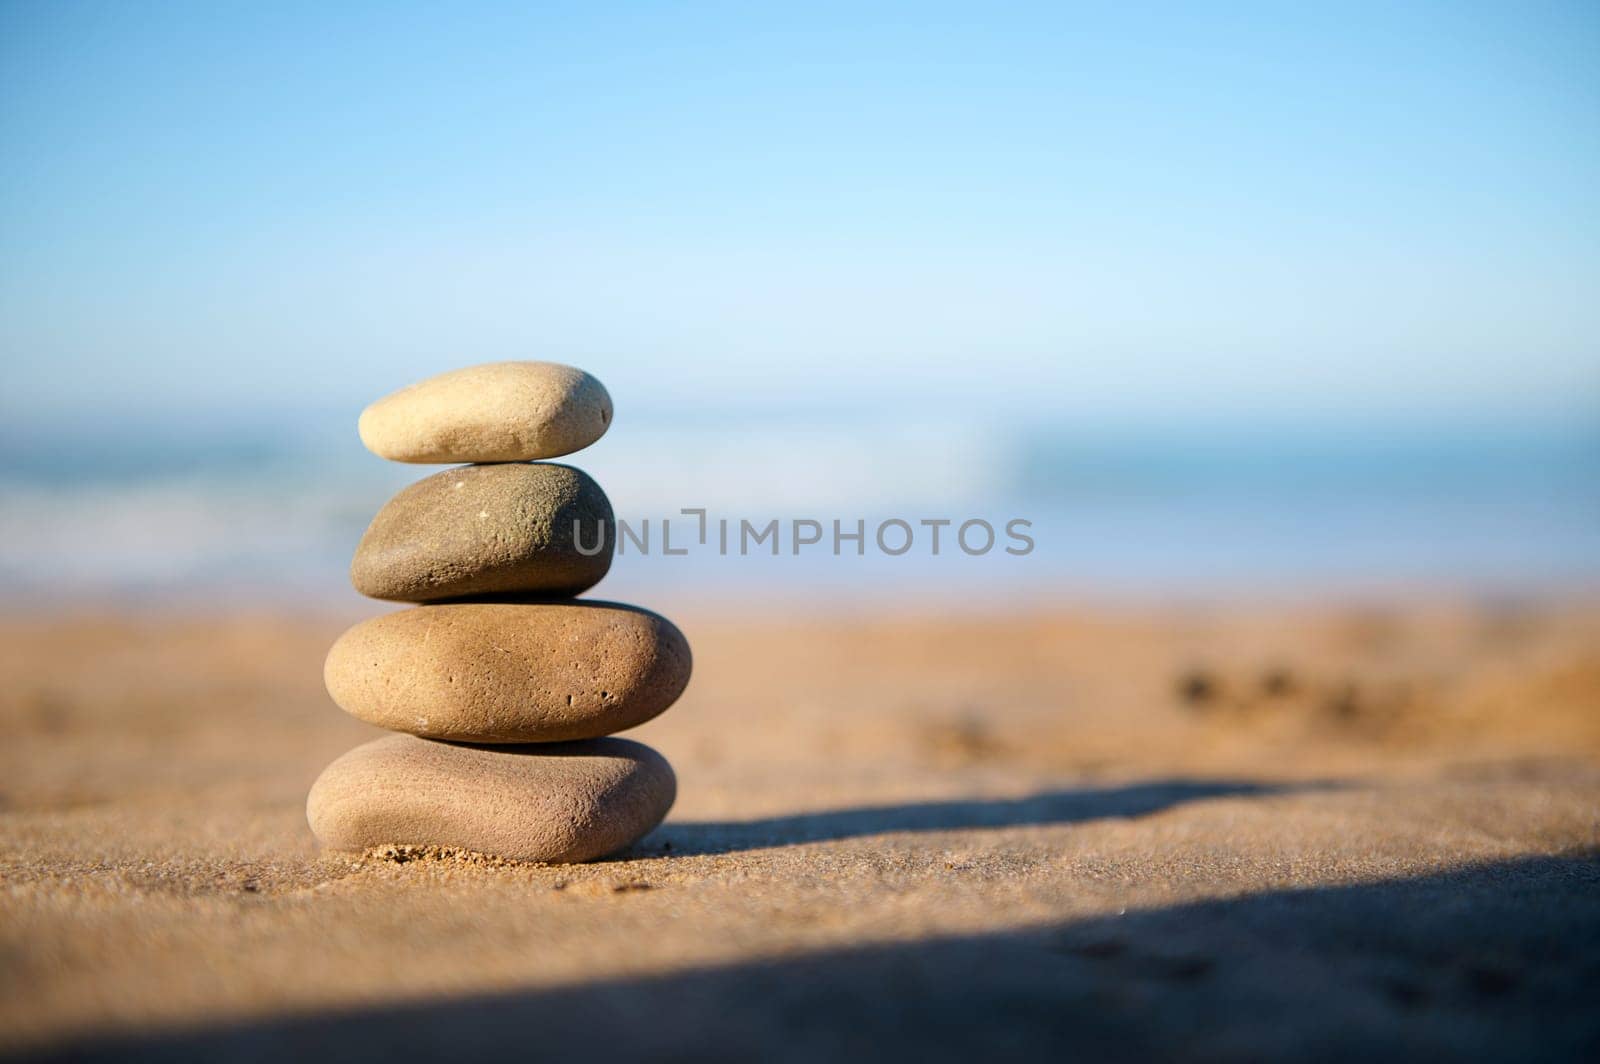 Still life with stacked pebbles, stones on the sandy beach against the background of Atlantic ocean with waves breaking on the beach. The concept of harmony and balance. Copy advertising space